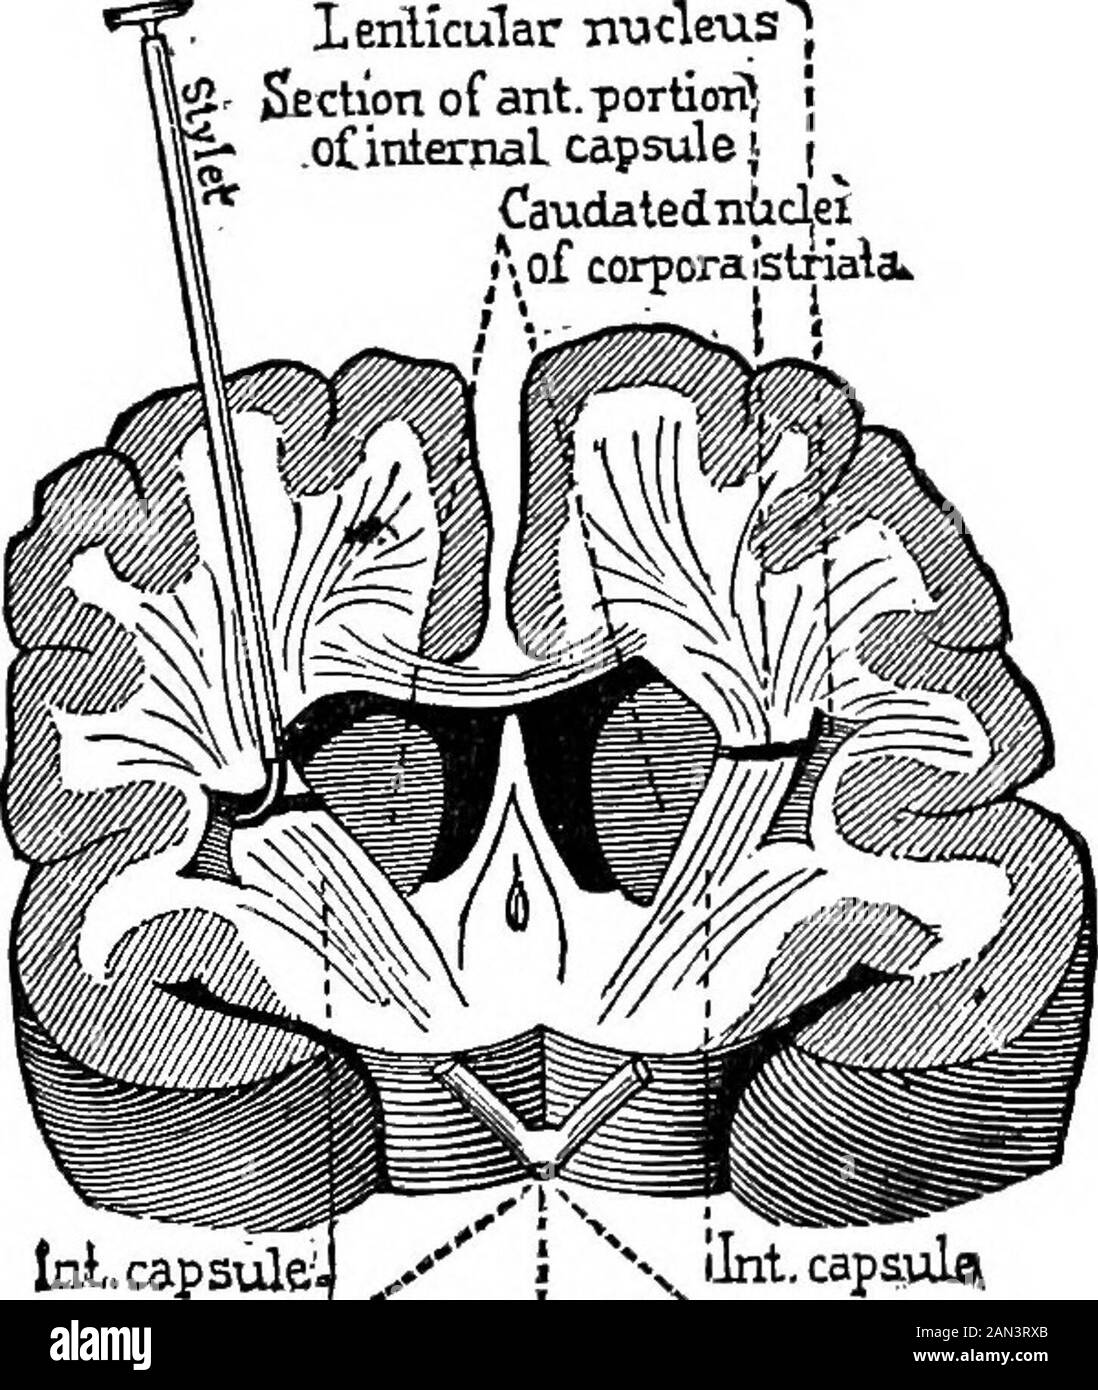 Lectures on localization in diseases of the brain, delivered at the Faculté de médecine, Paris, 1875 . !• .oCinlemal capsule j | ^Caudatedniclei* of corporastriali. IzA-capsulei (Tiiasma of optic nerves^ Fig. 27.—-Transverse section of a dogsbrain, five millimetres anterior to the opticchiasma. that assertion, in showingthat a lesion situated abovethose points, in certain re-gions of the brain itself, wasquite sufficient to invariablyproduce a total hemianses-thesia. Recent experimentalresearches made by Duretand Veyssi^re, in the lab.or-atory of Vulpian, have givenresults also in conformity Stock Photo